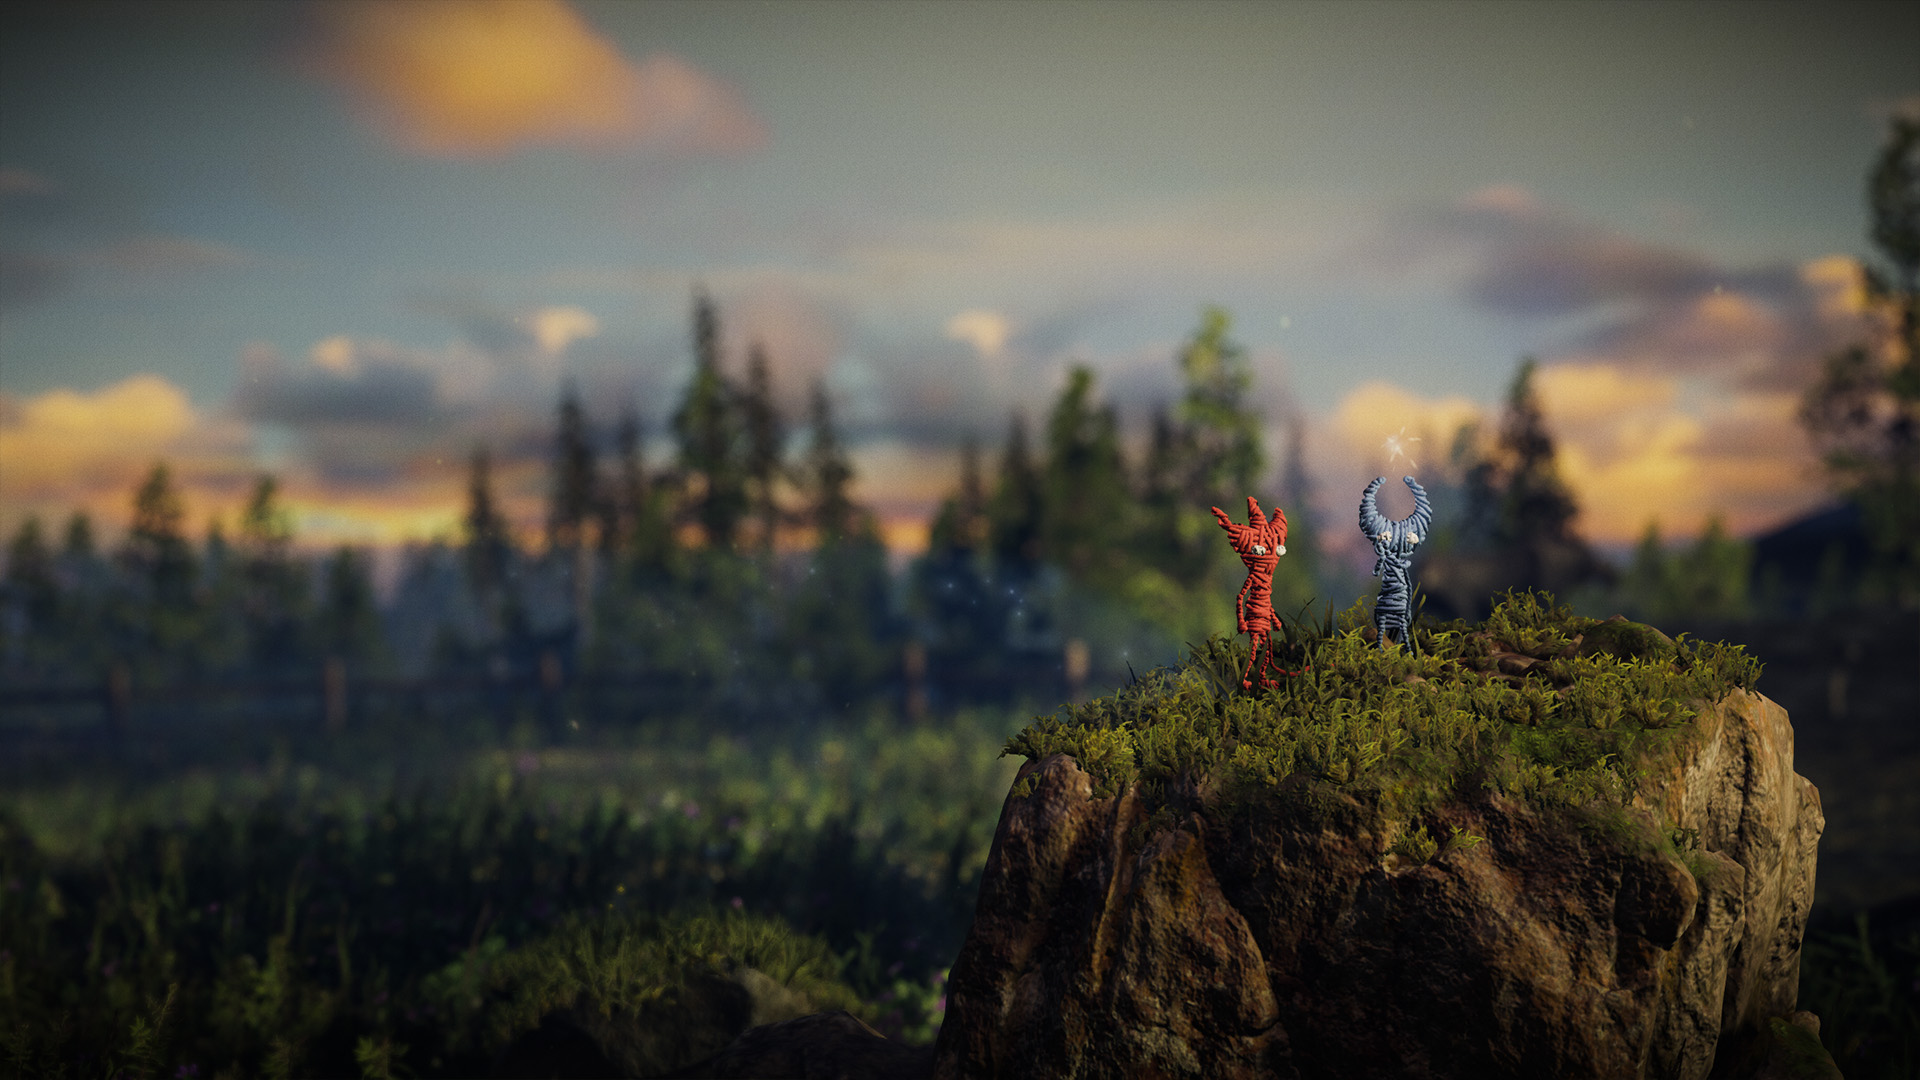 Unravel Two Review